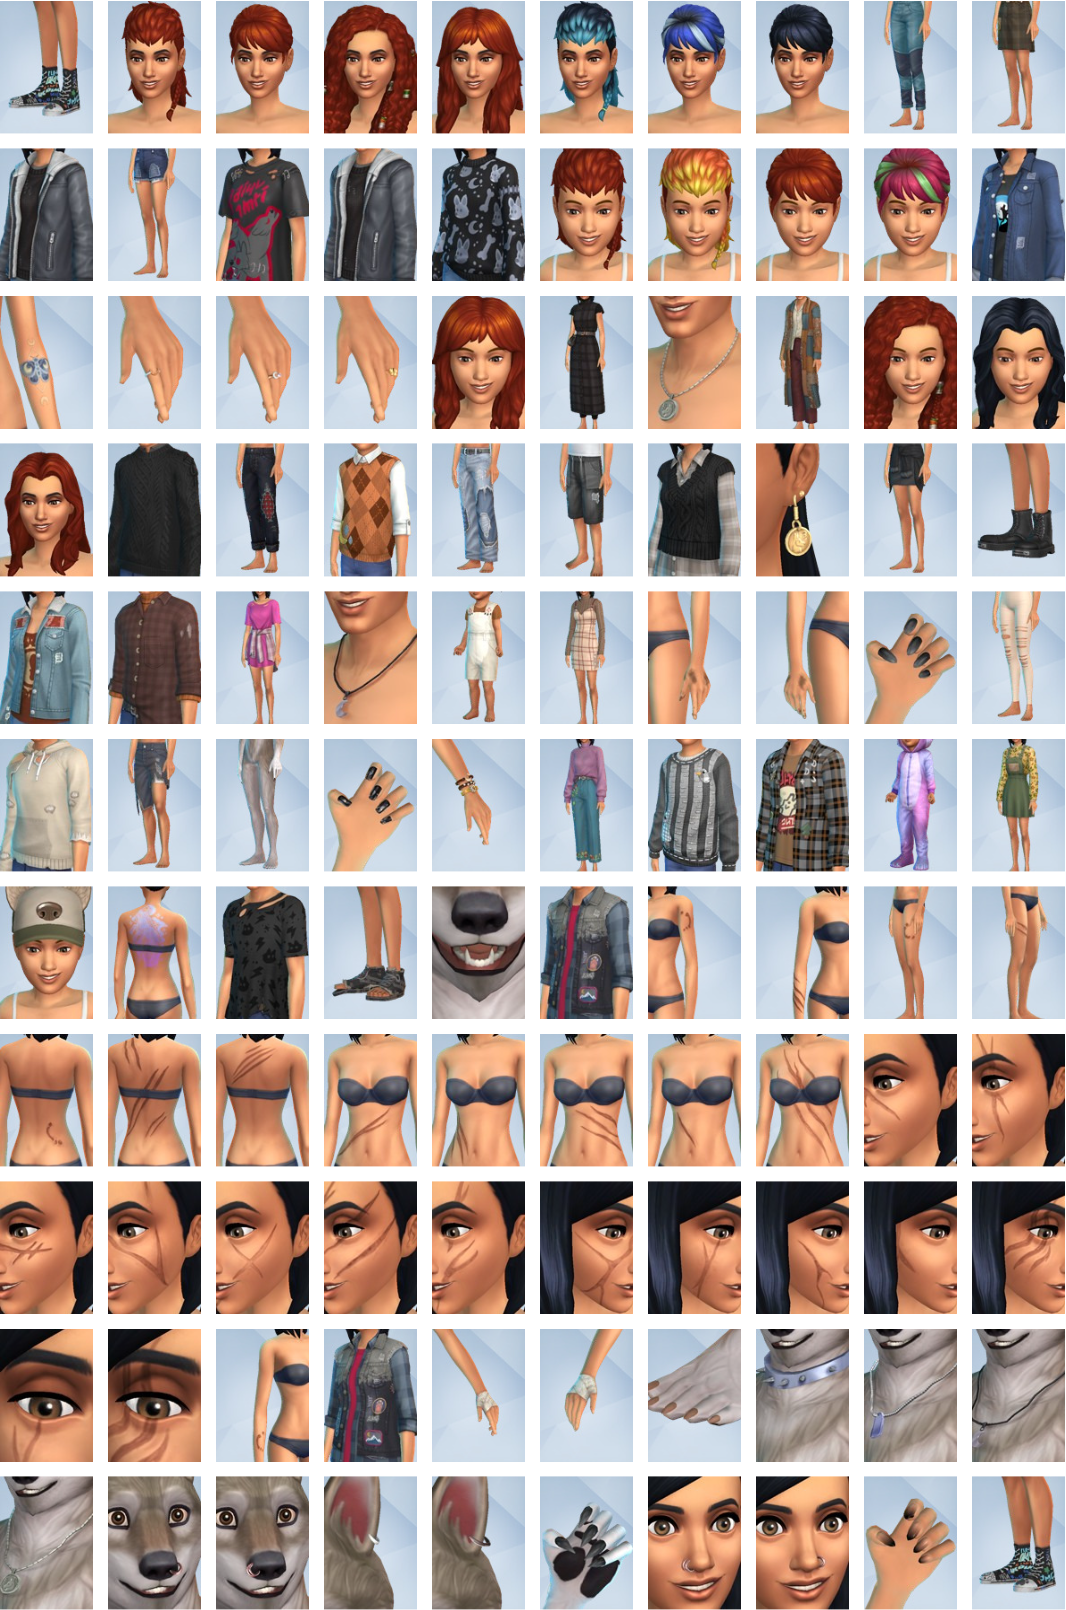 The Sims 4 Werewolves Game Pack - Create a Sim Items